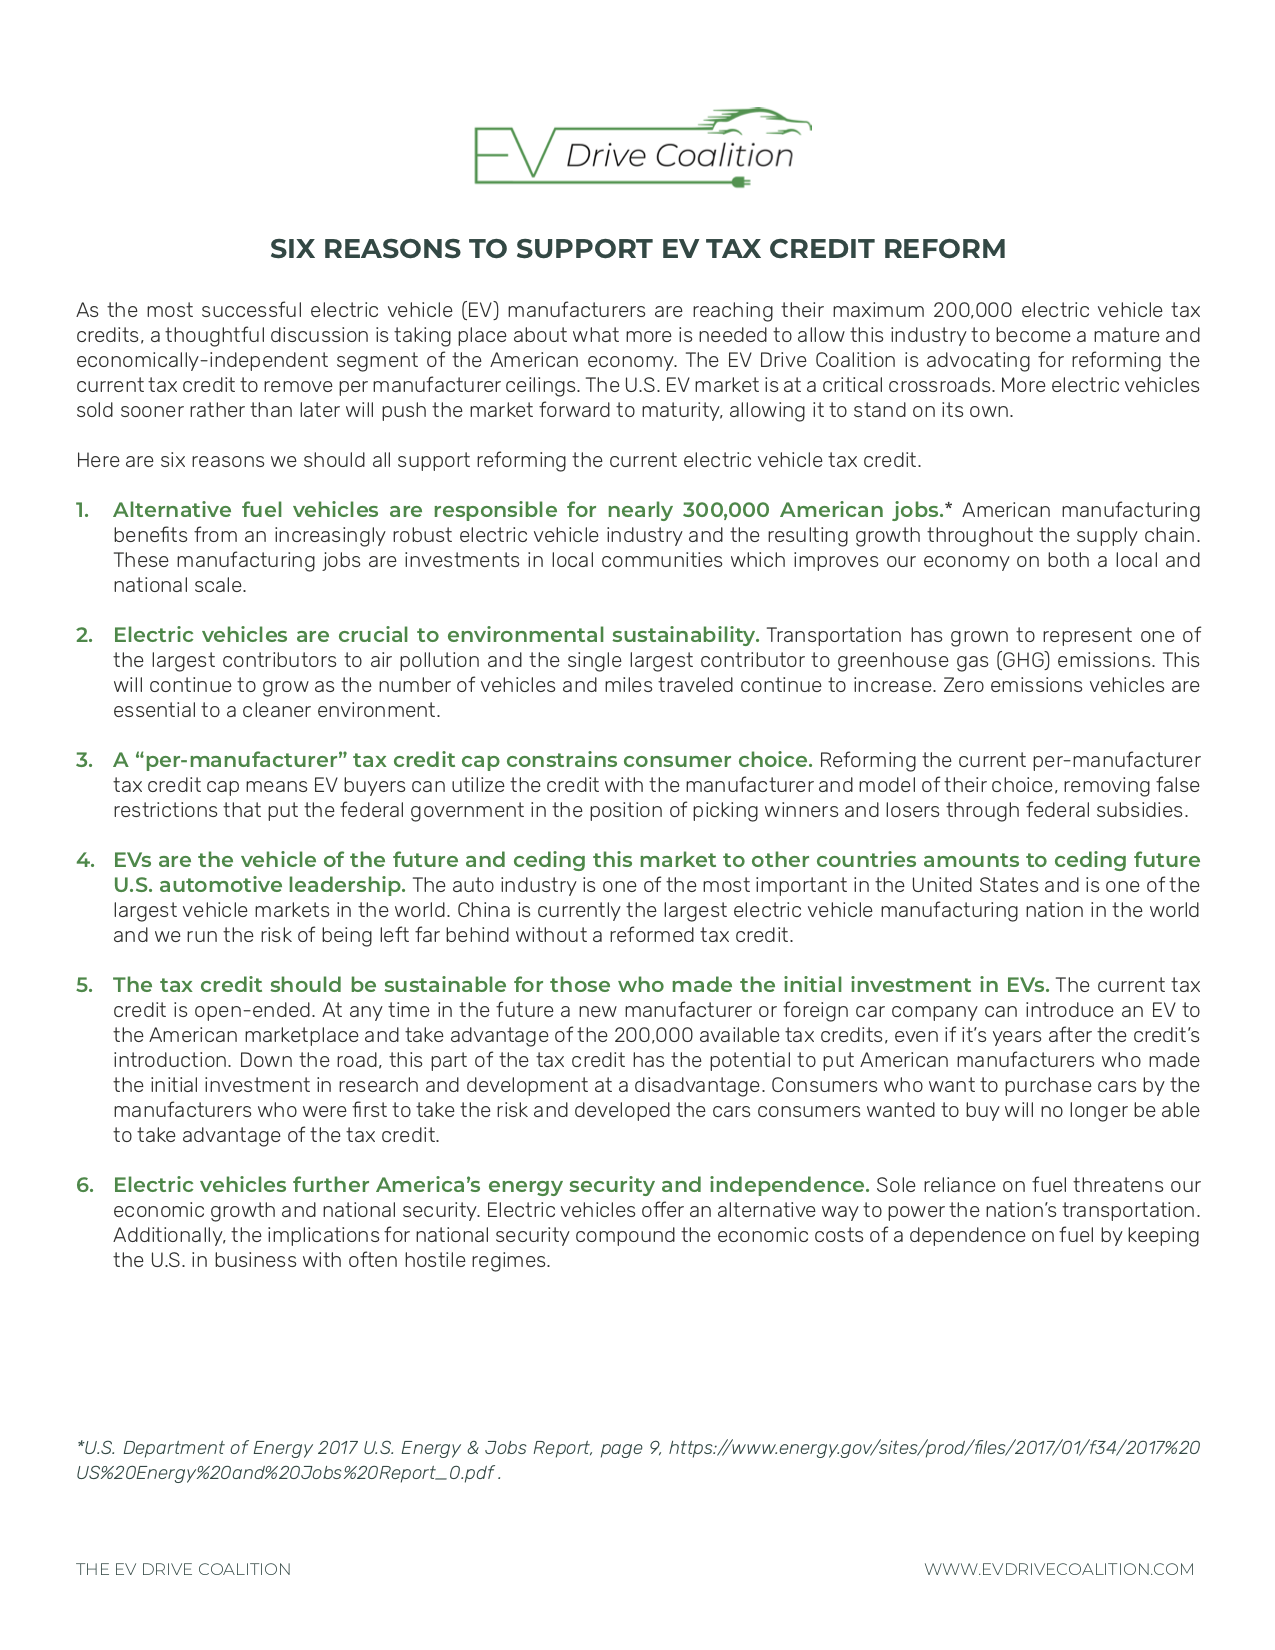 Six Reasons to Support EV Tax Credit Reform Final v2.png